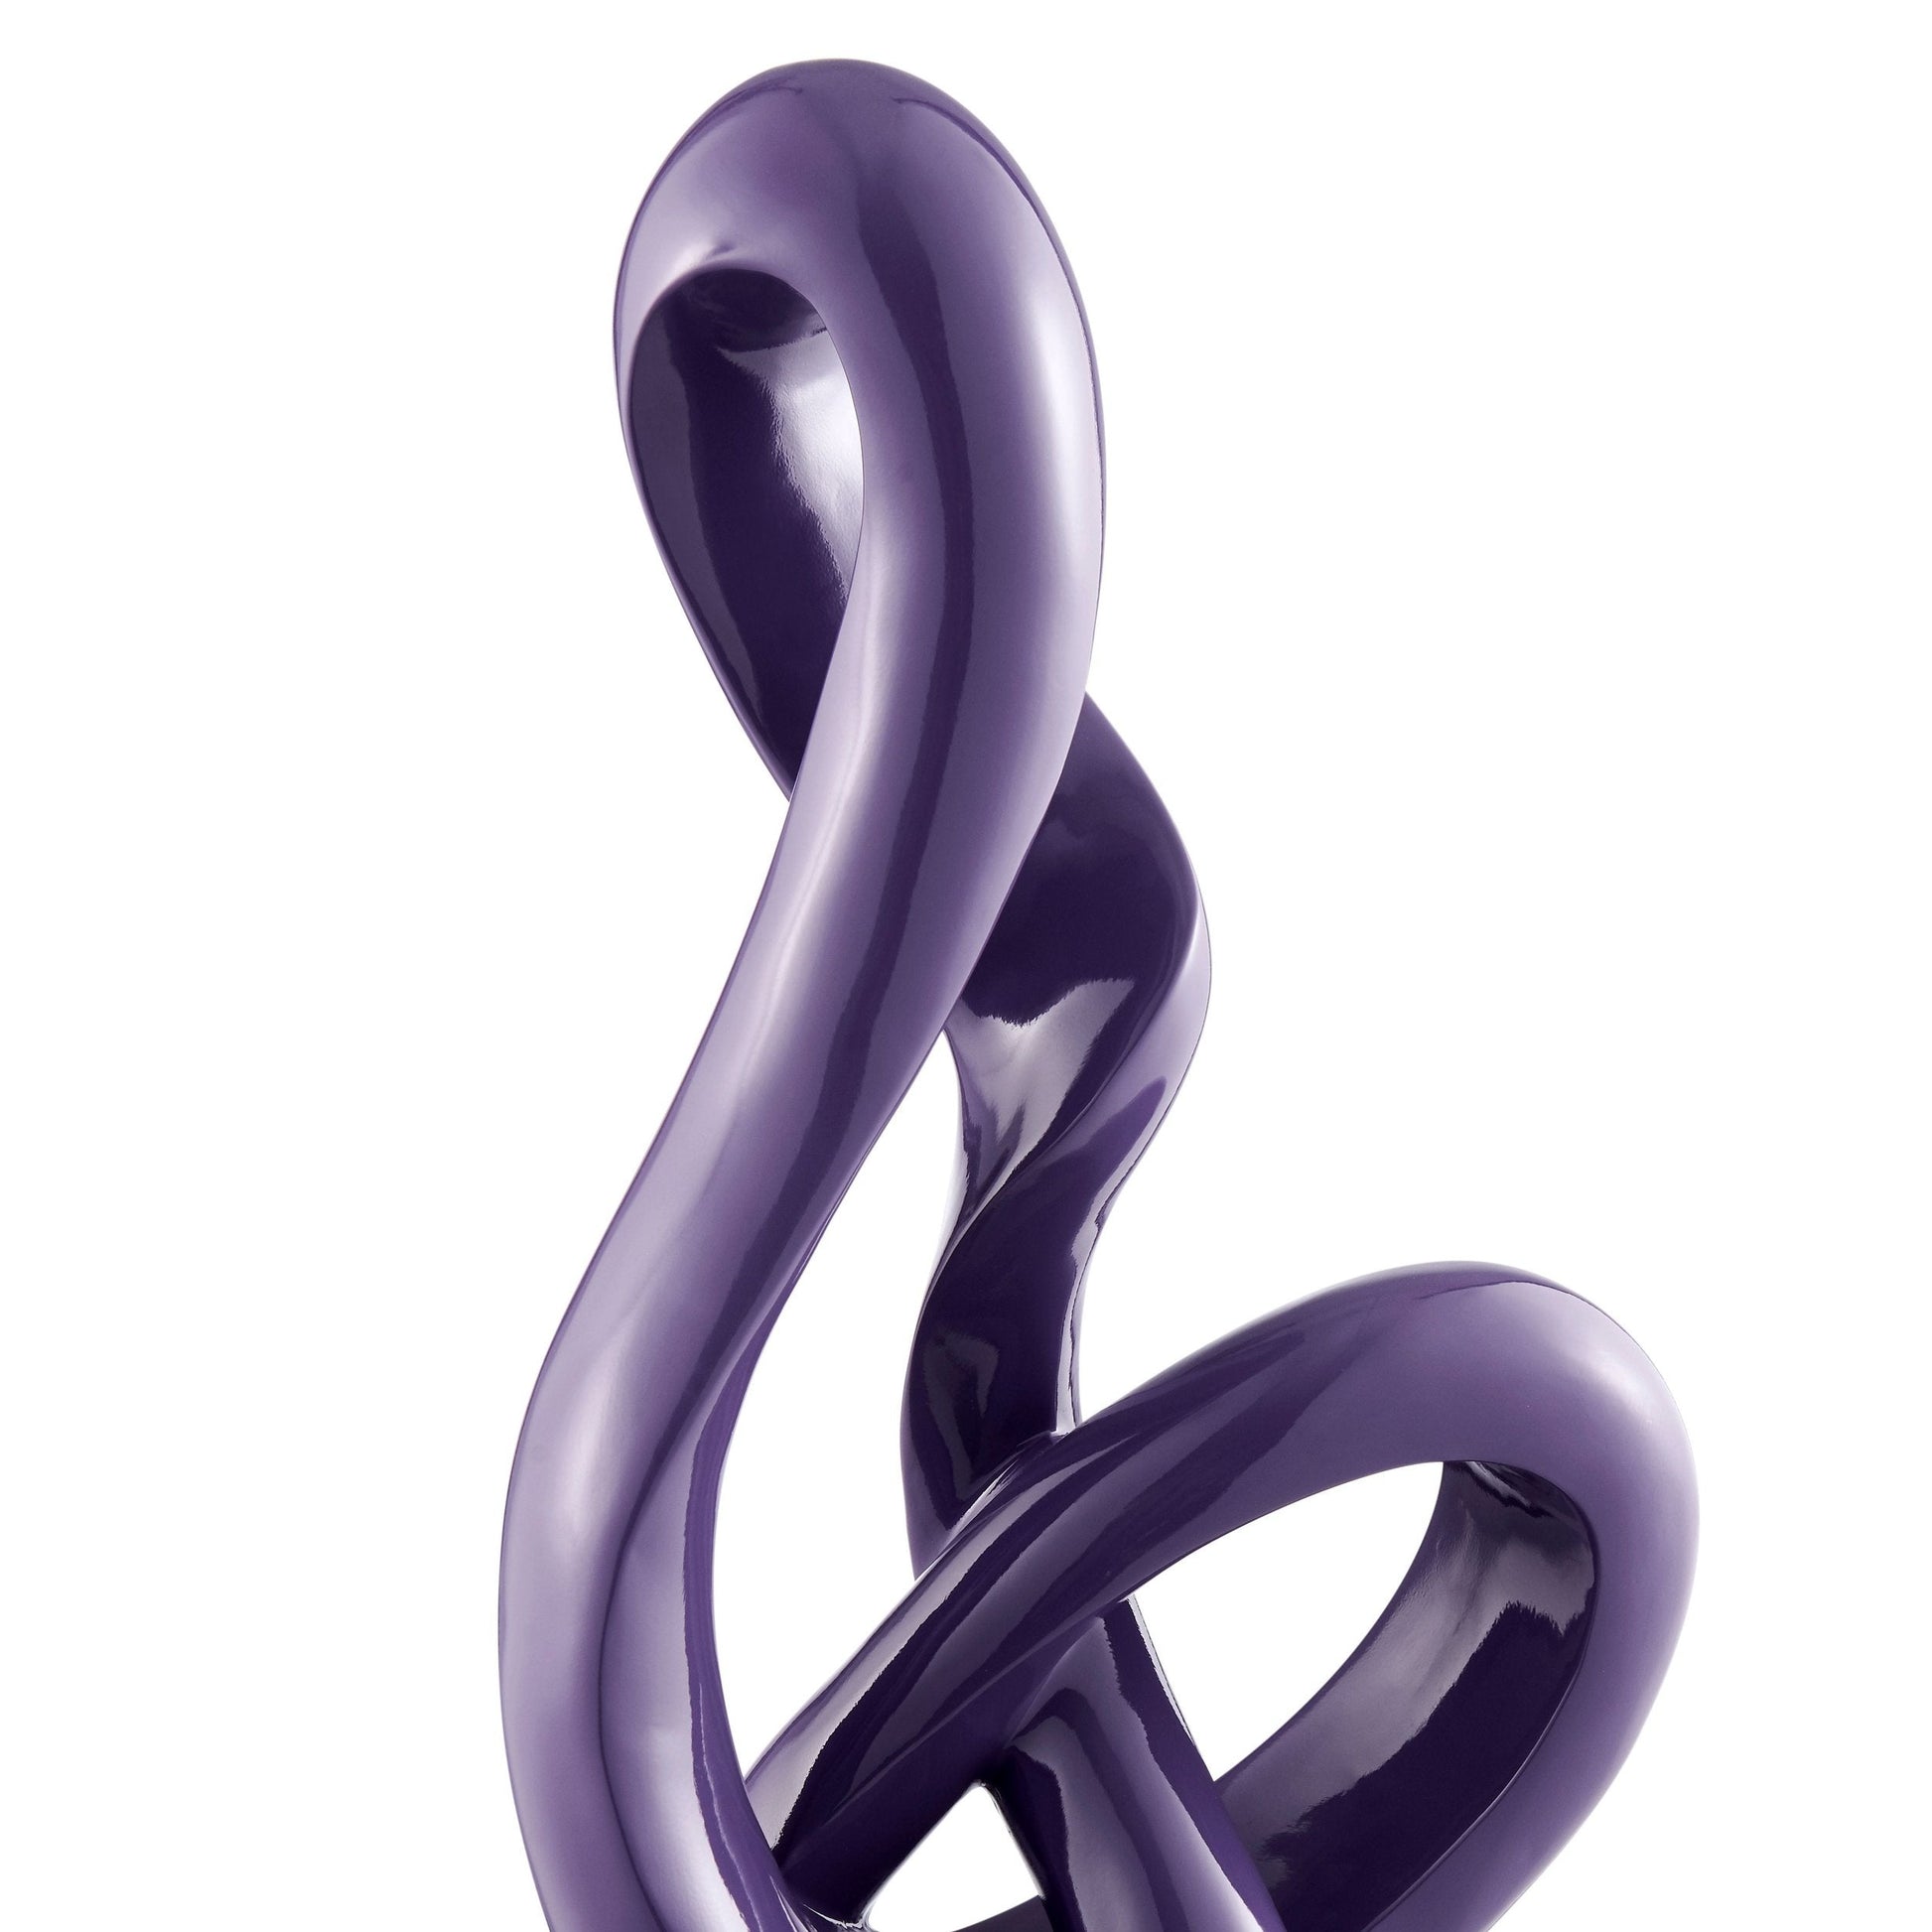 Antilia Abstract Sculpture // Small Violet